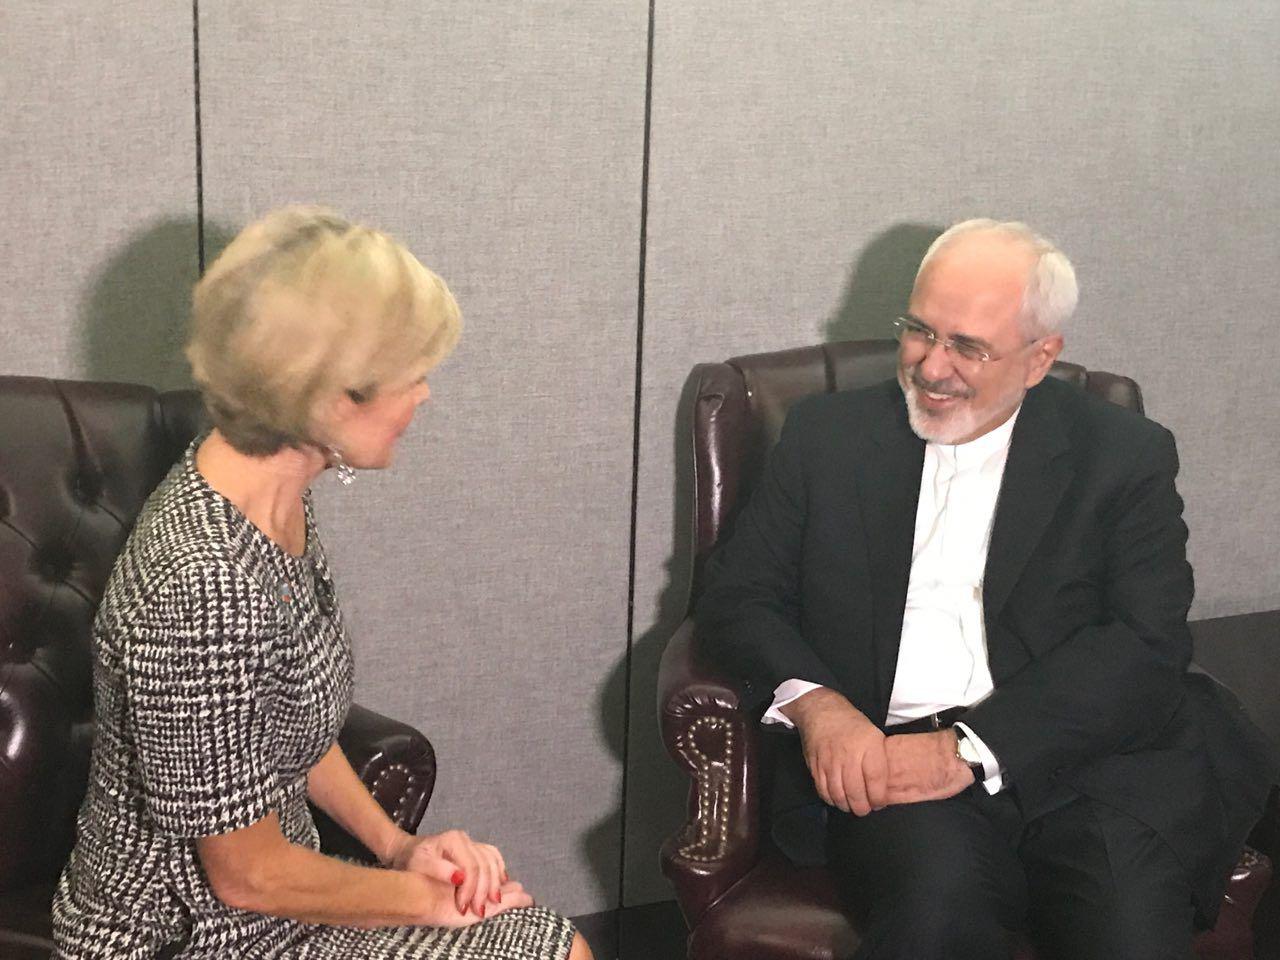 Earlier in the day Zarif and his Danish counterpart Anders Samuelsen conferred on ways to expand bilateral relations between Tehran and Copenhagen